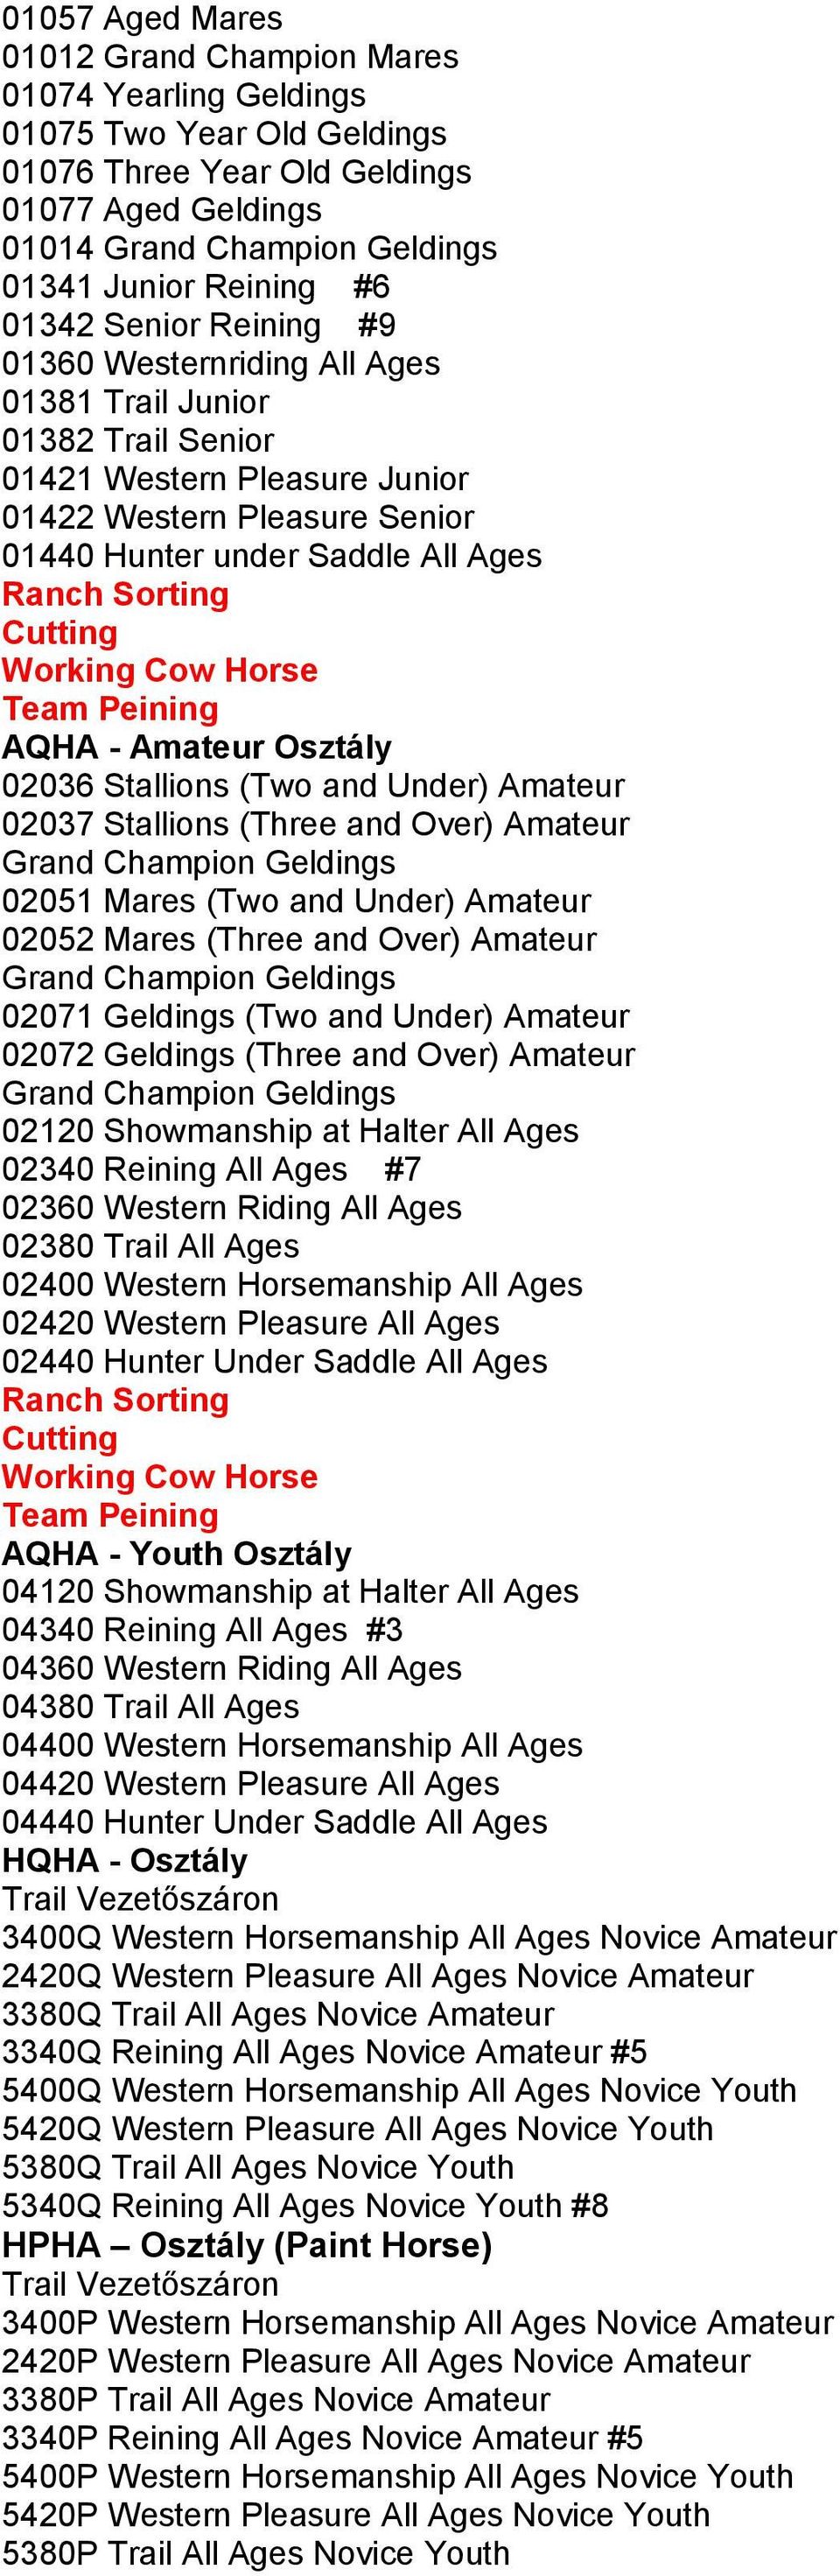 Horse Team Peining AQHA - Amateur Osztály 02036 Stallions (Two and Under) Amateur 02037 Stallions (Three and Over) Amateur 02051 Mares (Two and Under) Amateur 02052 Mares (Three and Over) Amateur